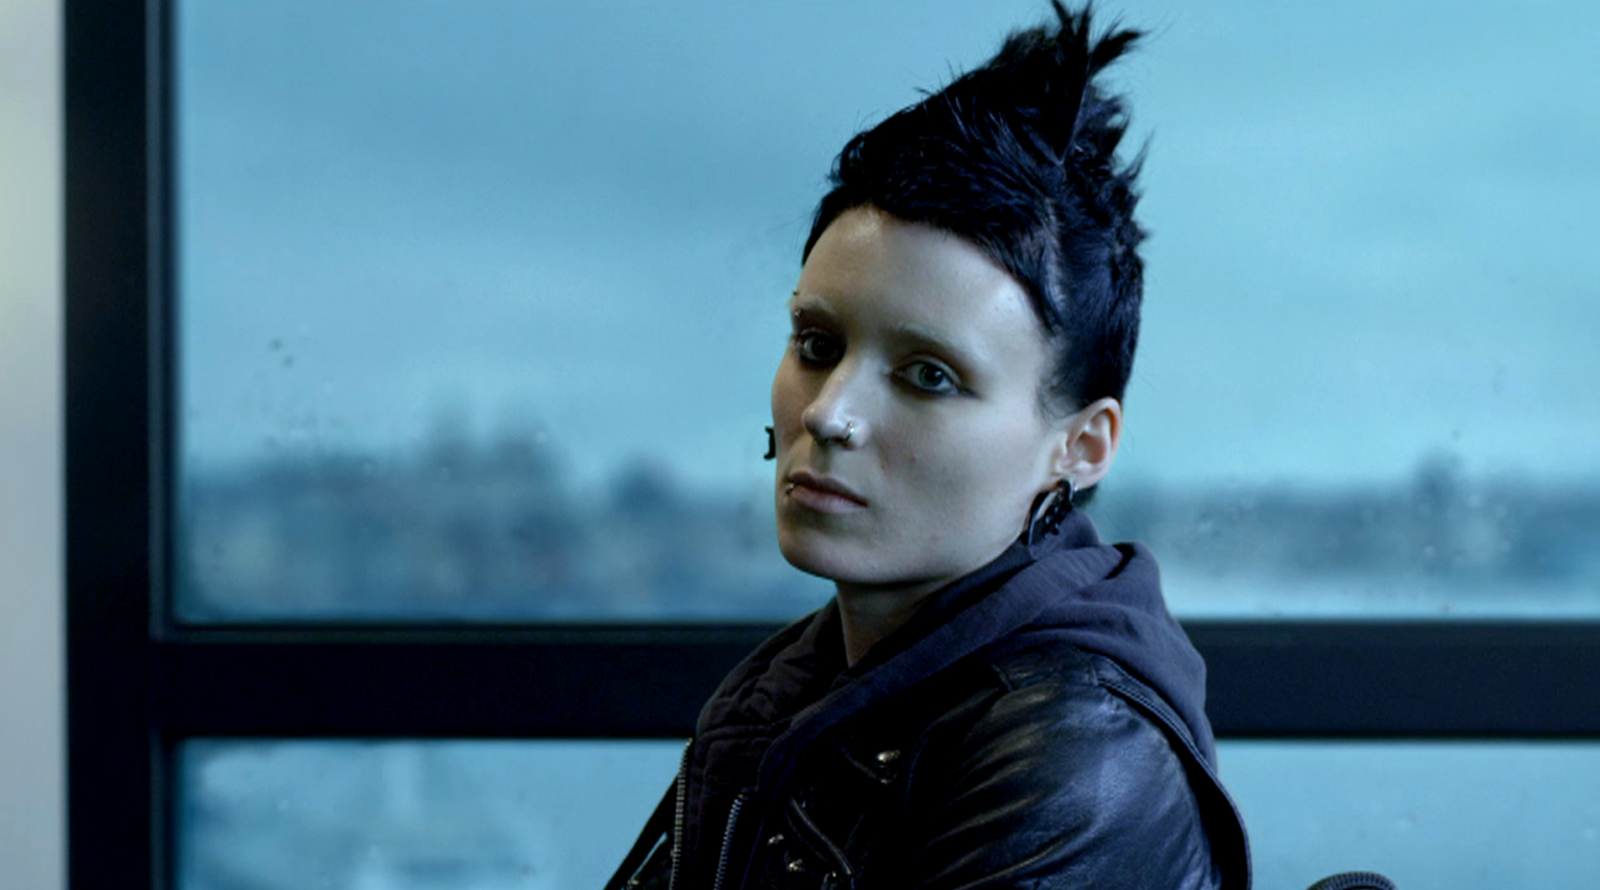 ‘the girl with the dragon tattoo’ sequel gets all new cast/director